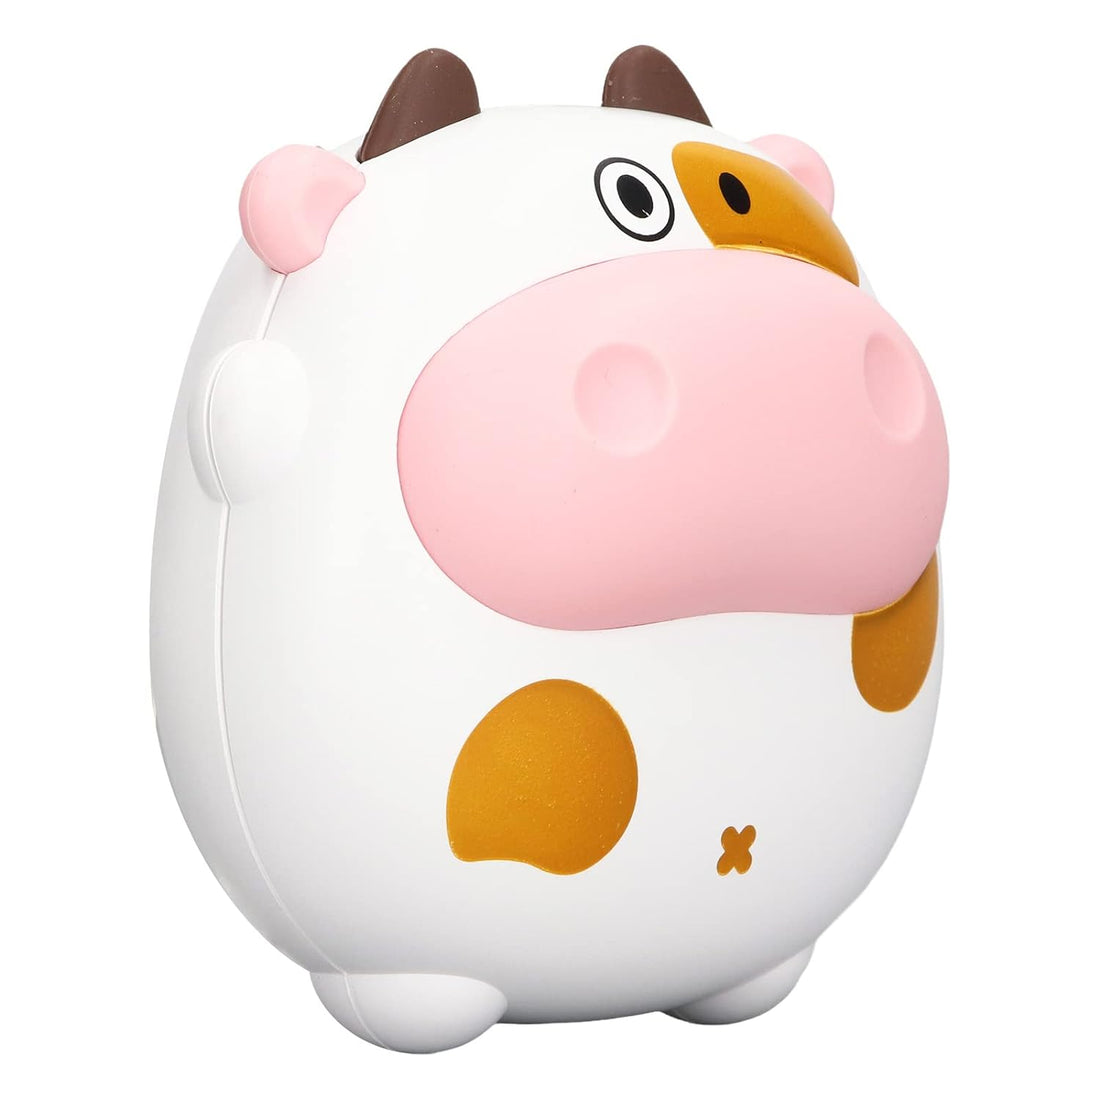 Electric Mini 2 Levels USB Rechargeable Fast Heating Cartoon Cow Night Light Heater (White)